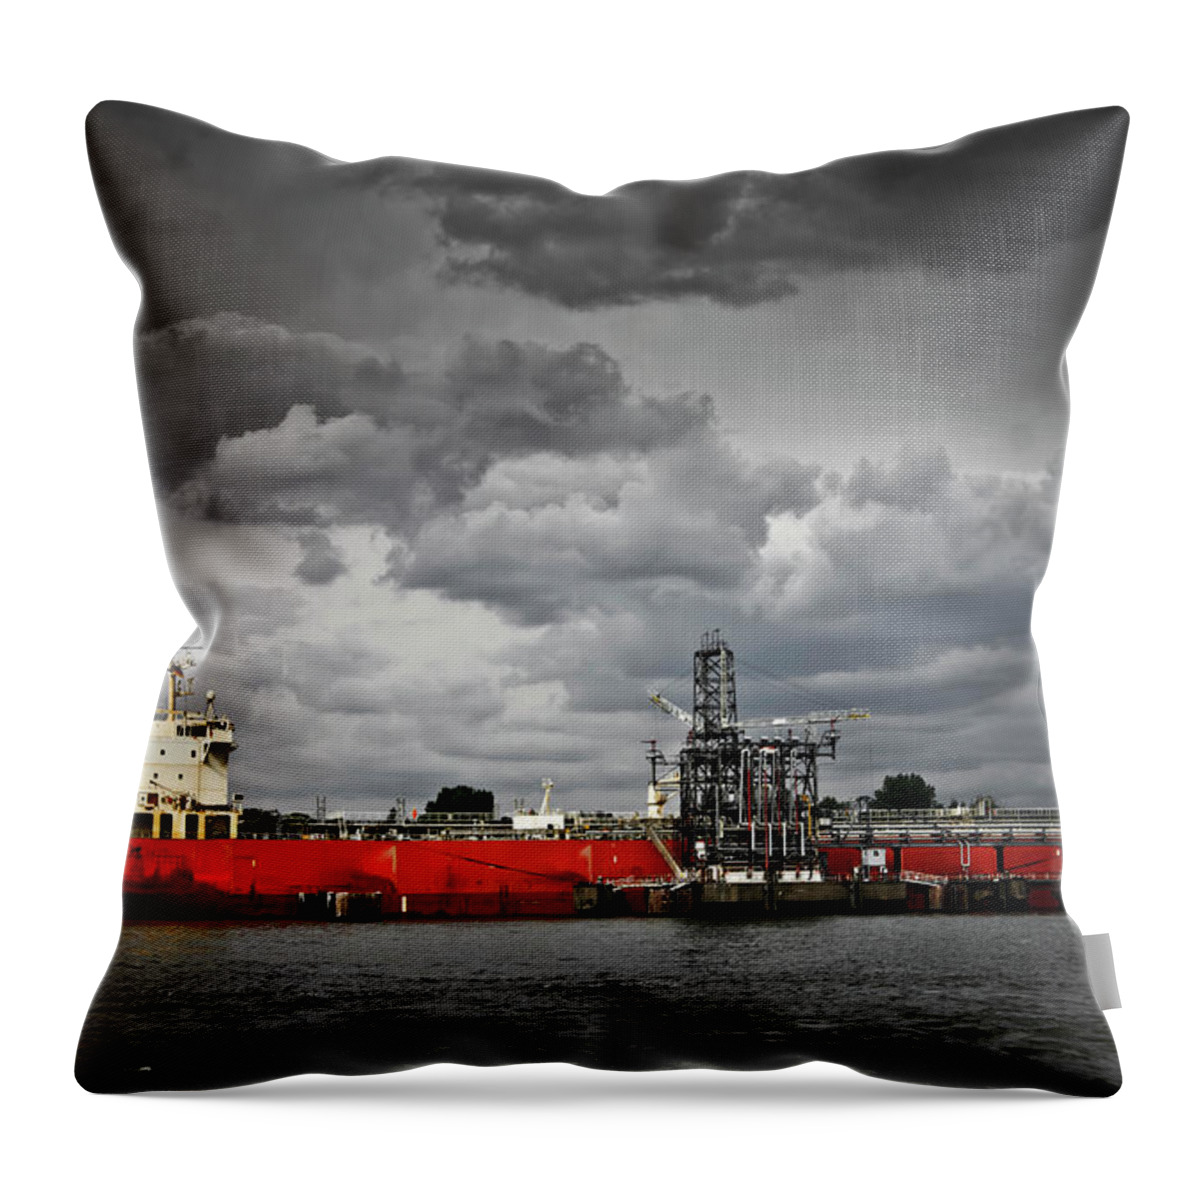 Trading Throw Pillow featuring the photograph Oil Tanker In A Port by Delectus